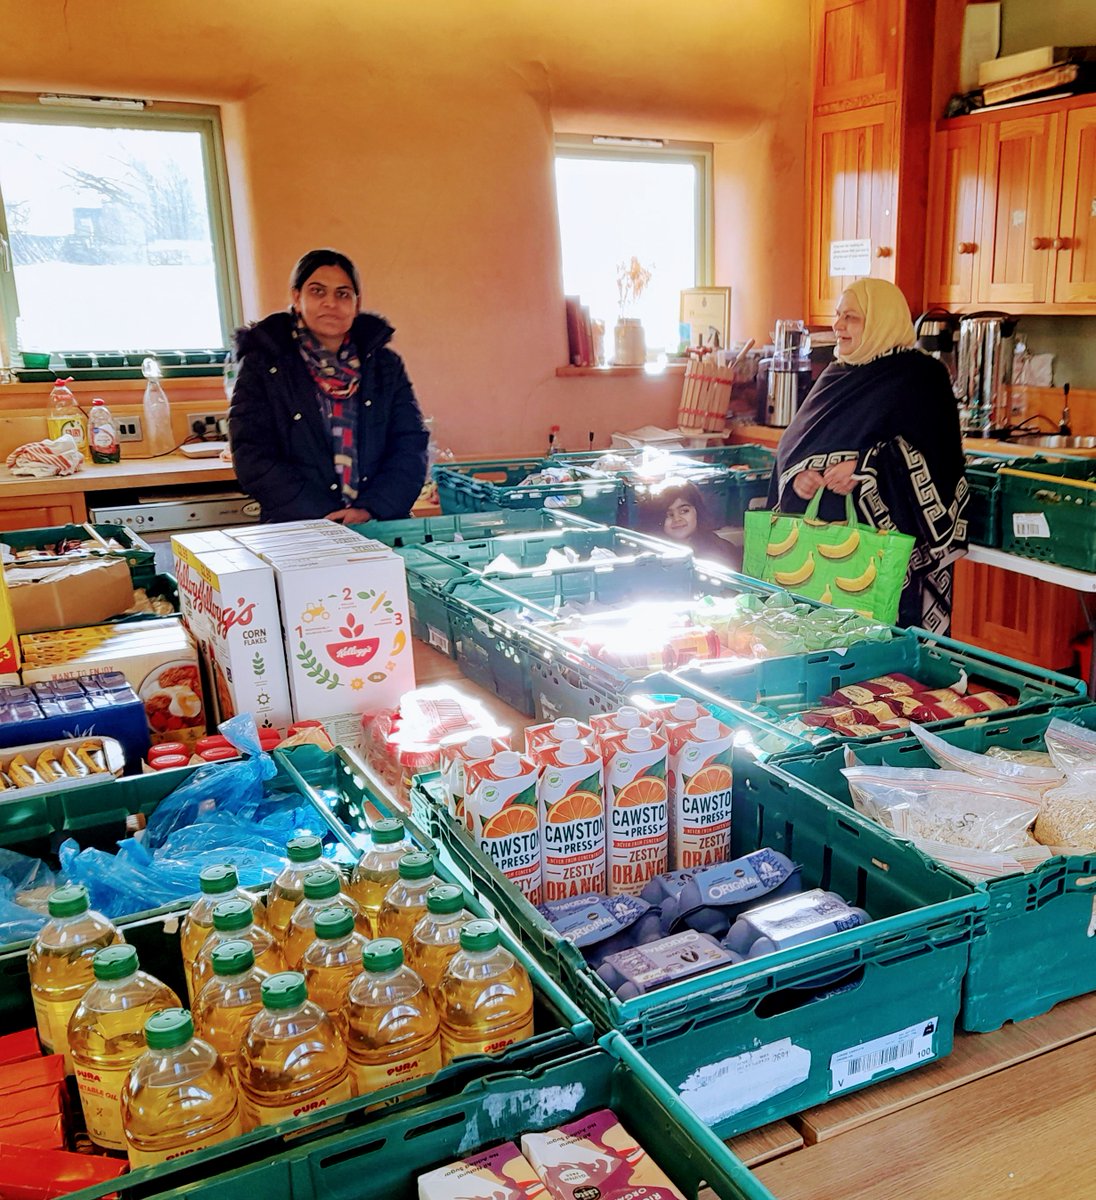 Our Community Pantry is now OPEN! If you'd like to become a member it's just a £1 annual membership fee, and each weekly visit is just £4 for ten items, alongside the continuing share of our free fresh fruit, vegetables and bakery items. #CommunityPantry #StrongerCommunities